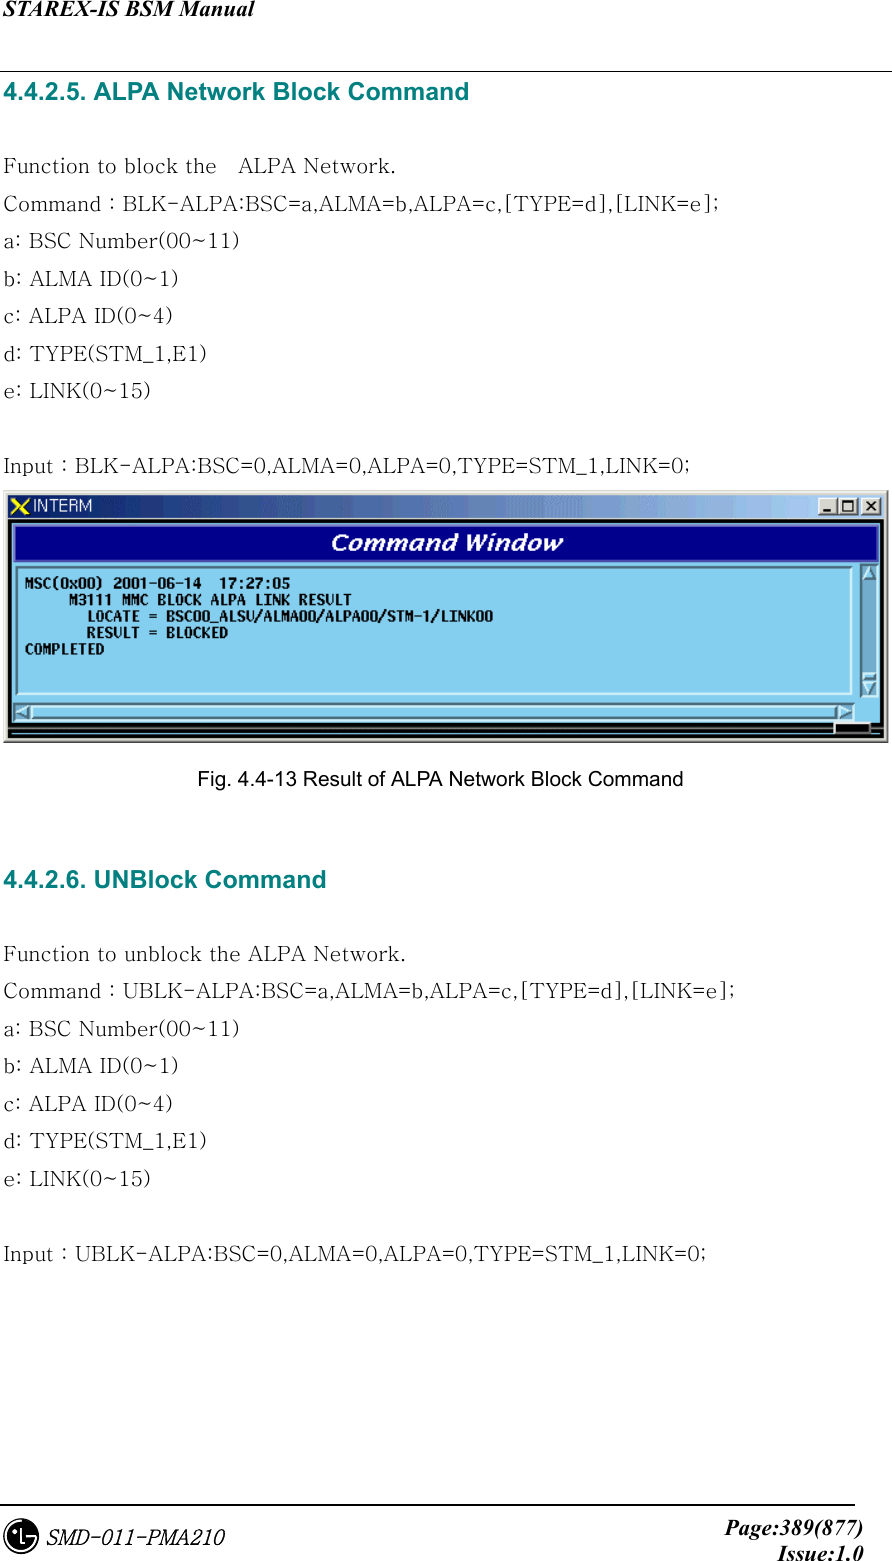 STAREX-IS BSM Manual     Page:389(877)Issue:1.0SMD-011-PMA210 4.4.2.5. ALPA Network Block Command  Function to block the    ALPA Network. Command : BLK-ALPA:BSC=a,ALMA=b,ALPA=c,[TYPE=d],[LINK=e]; a: BSC Number(00~11) b: ALMA ID(0~1) c: ALPA ID(0~4) d: TYPE(STM_1,E1) e: LINK(0~15)  Input : BLK-ALPA:BSC=0,ALMA=0,ALPA=0,TYPE=STM_1,LINK=0;  Fig. 4.4-13 Result of ALPA Network Block Command  4.4.2.6. UNBlock Command  Function to unblock the ALPA Network. Command : UBLK-ALPA:BSC=a,ALMA=b,ALPA=c,[TYPE=d],[LINK=e]; a: BSC Number(00~11) b: ALMA ID(0~1) c: ALPA ID(0~4) d: TYPE(STM_1,E1) e: LINK(0~15)  Input : UBLK-ALPA:BSC=0,ALMA=0,ALPA=0,TYPE=STM_1,LINK=0; 